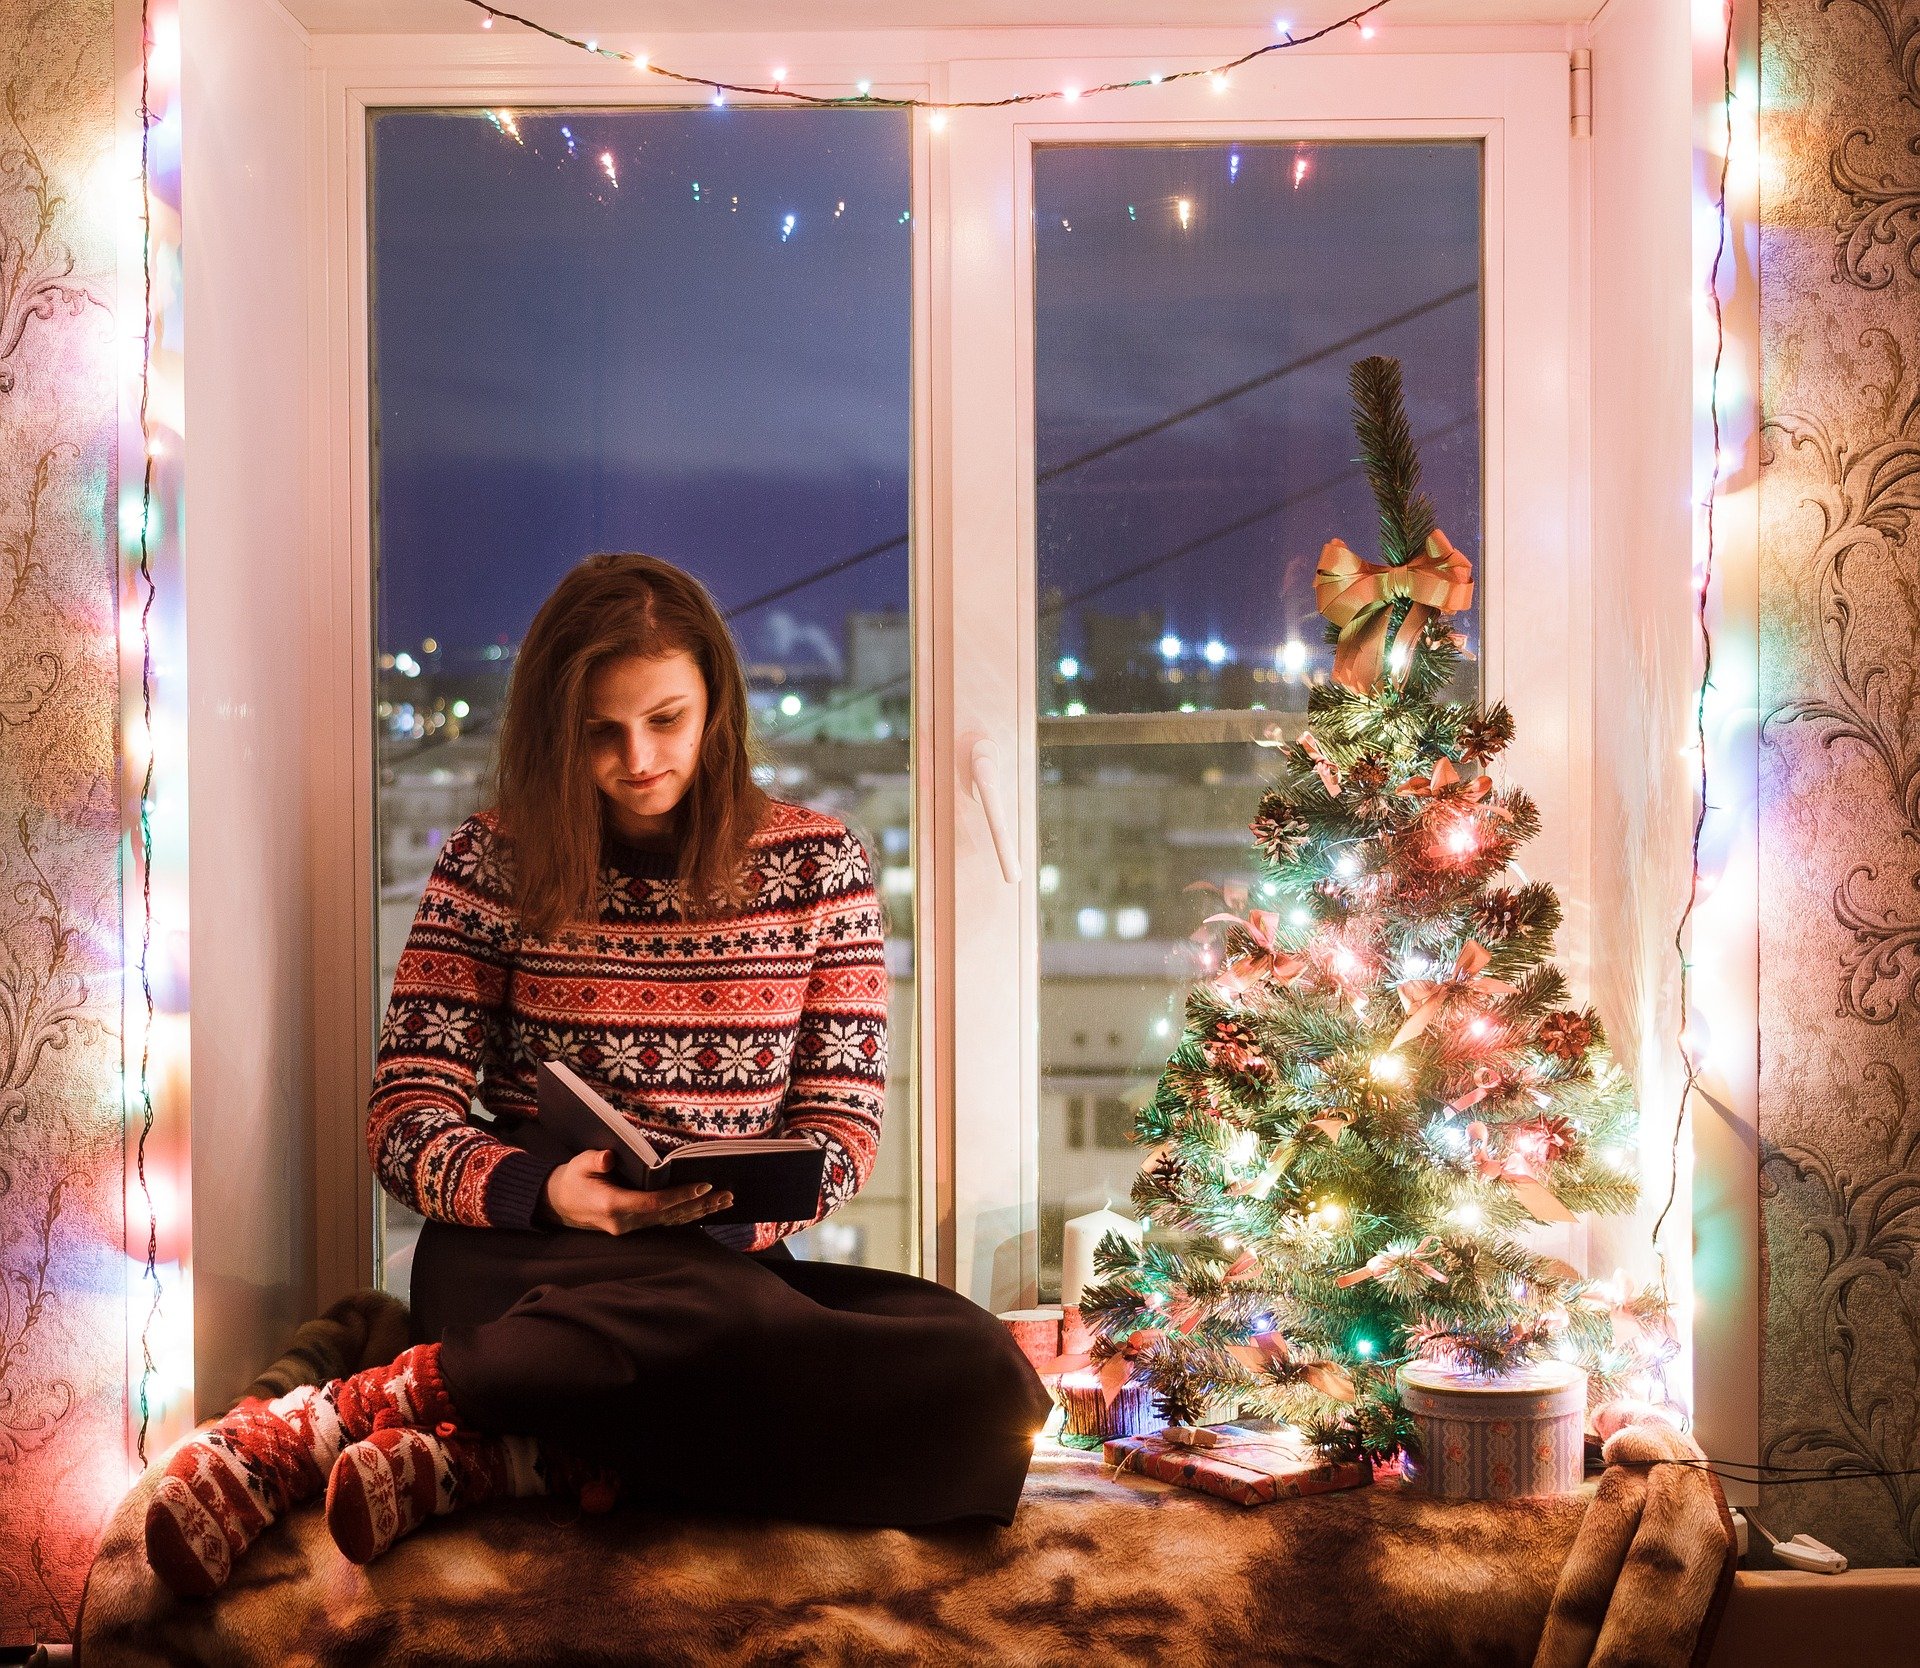 Woman reading a book in front of window with lights